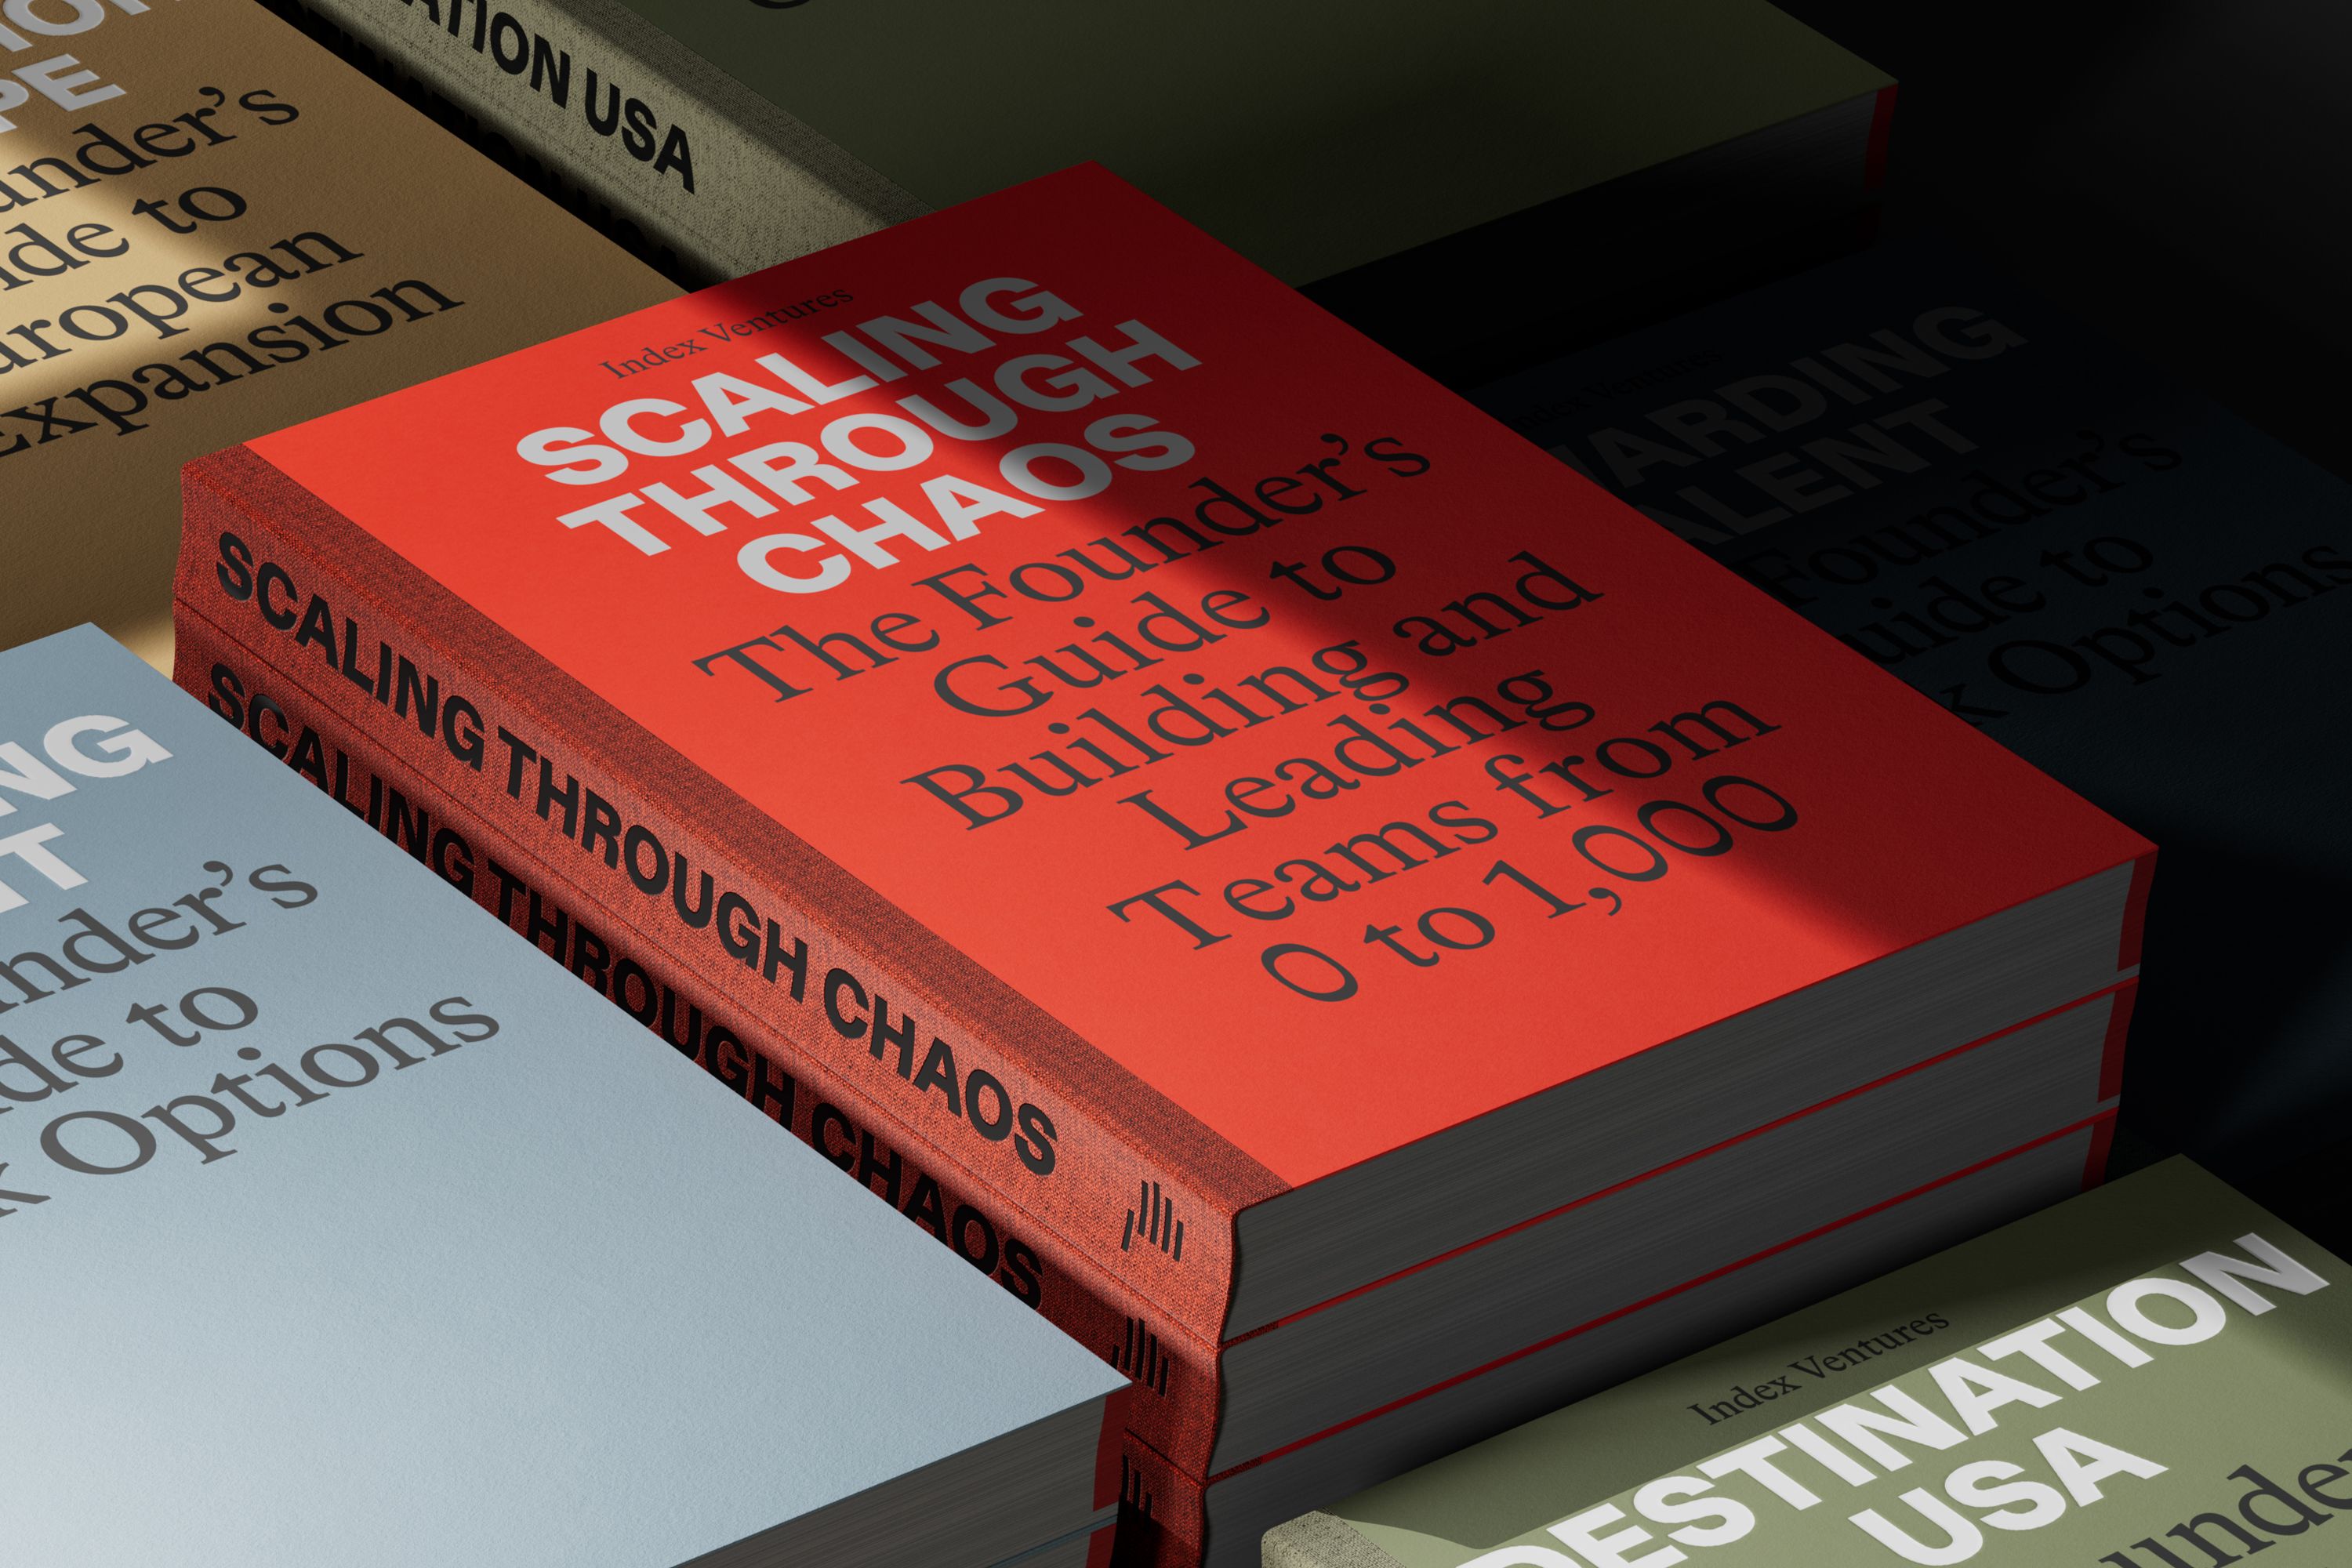 Index has released a series of books and apps for entrepreneurs, now available within Index Press